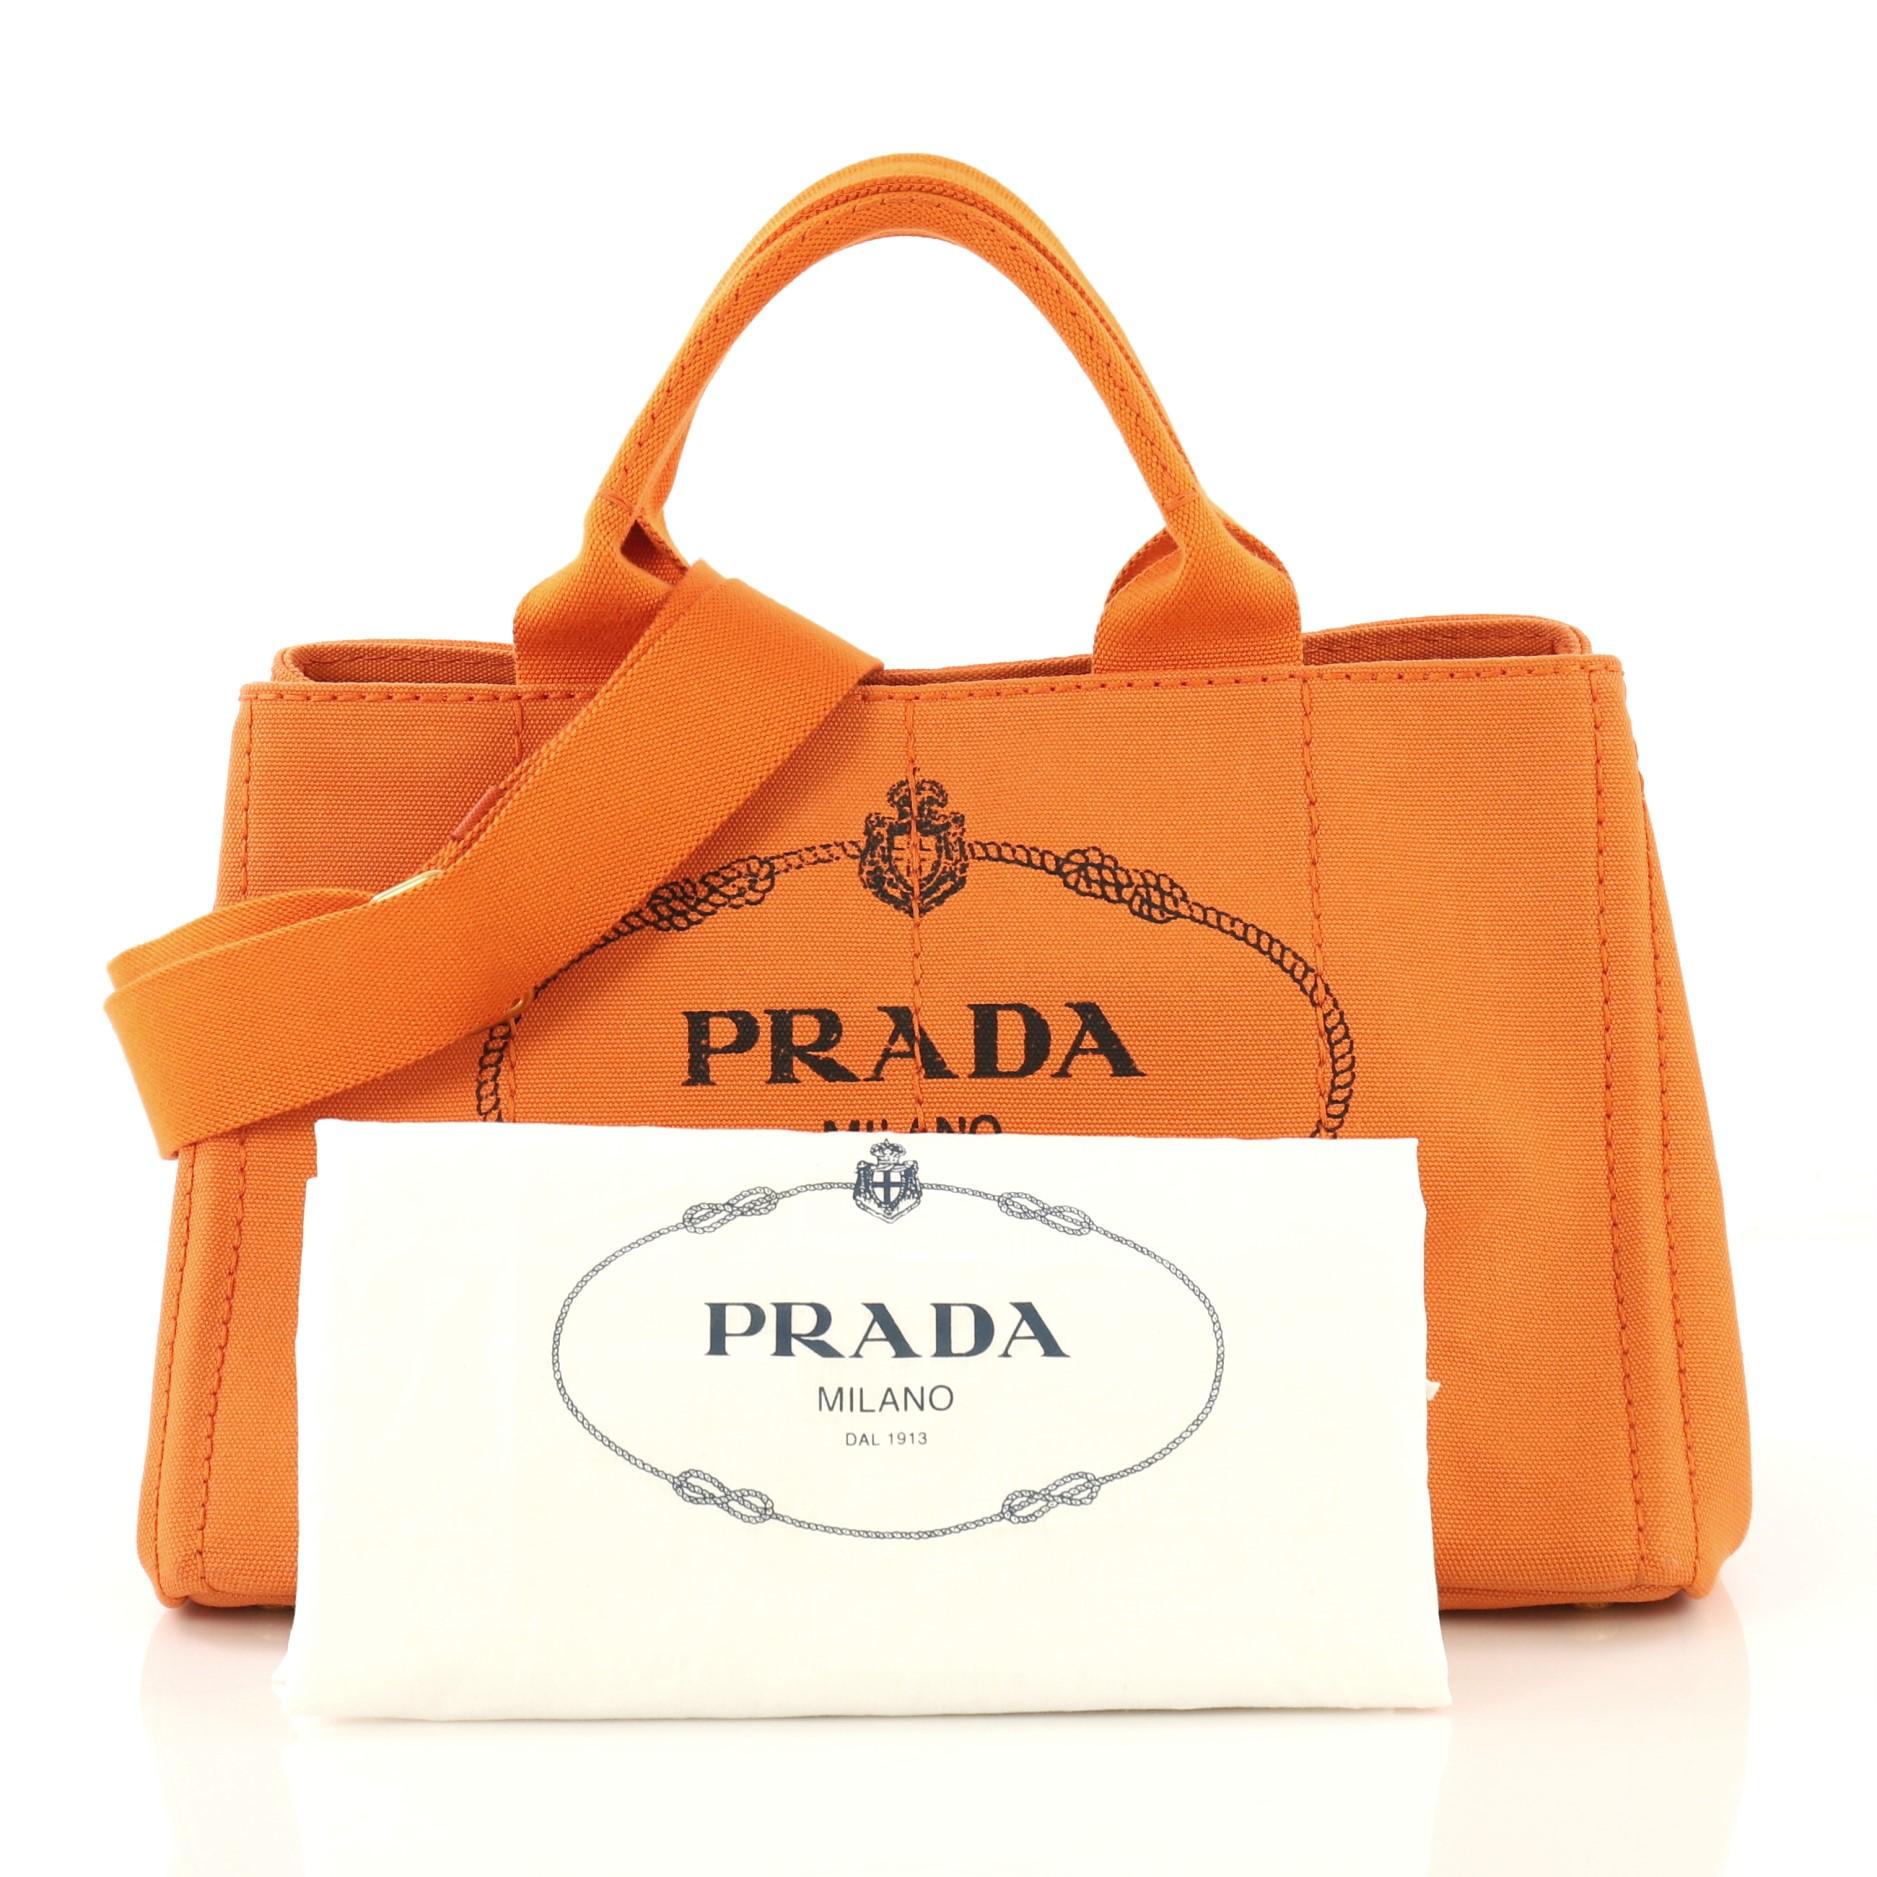 This Prada Canapa Convertible Tote Canvas Medium, crafted in orange canvas, features dual rolled handles, side snap buttons and gold-tone hardware. Its wide top opening showcases an orange canvas interior with side zip and slip pockets. 

Estimated